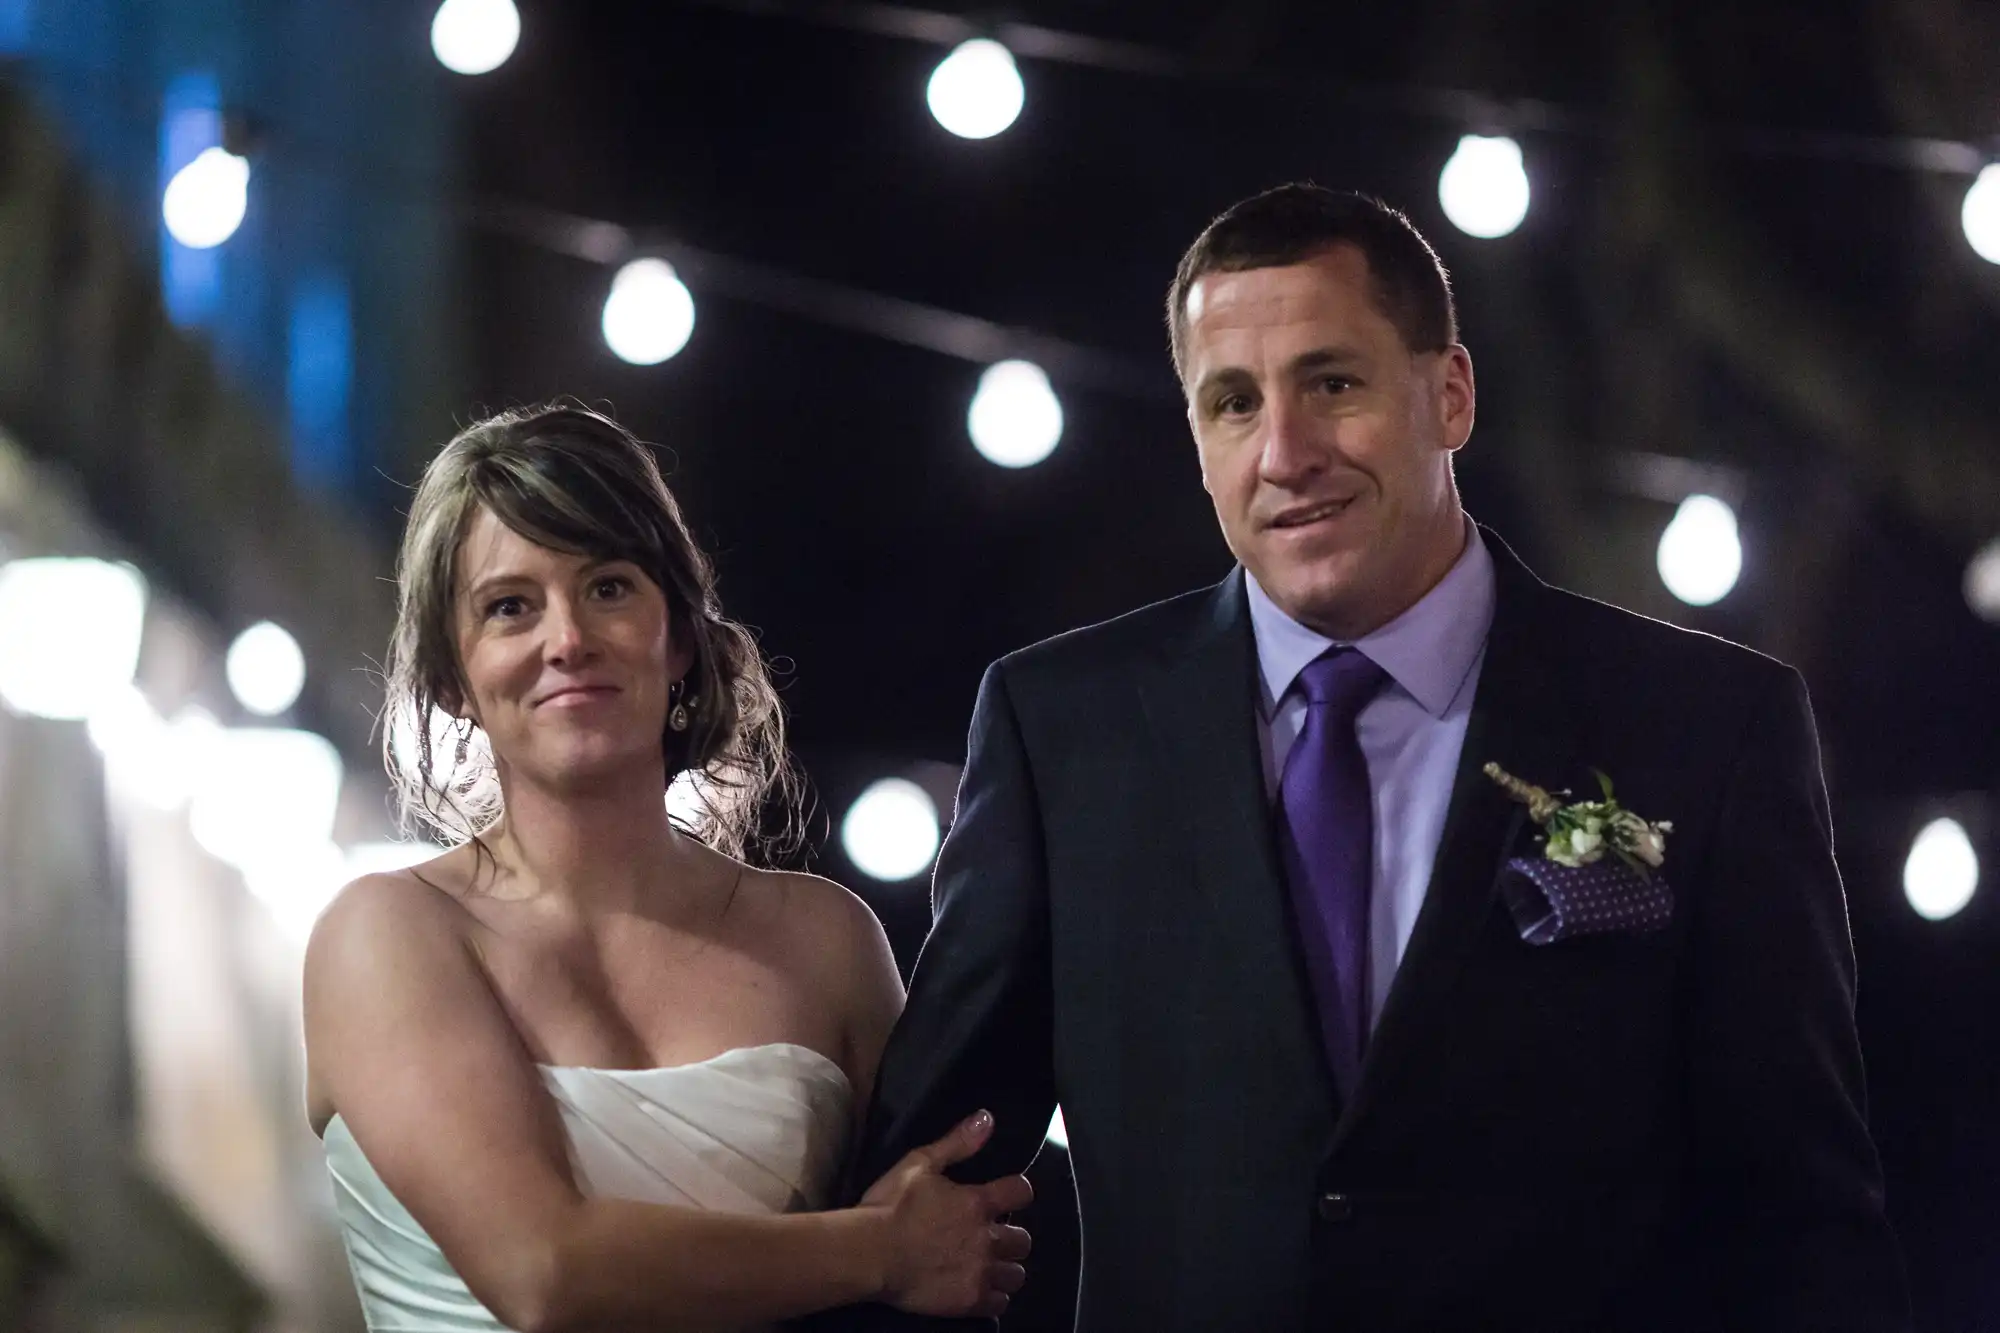 A bride in a white dress and a groom in a dark suit walk arm-in-arm at night under string lights.